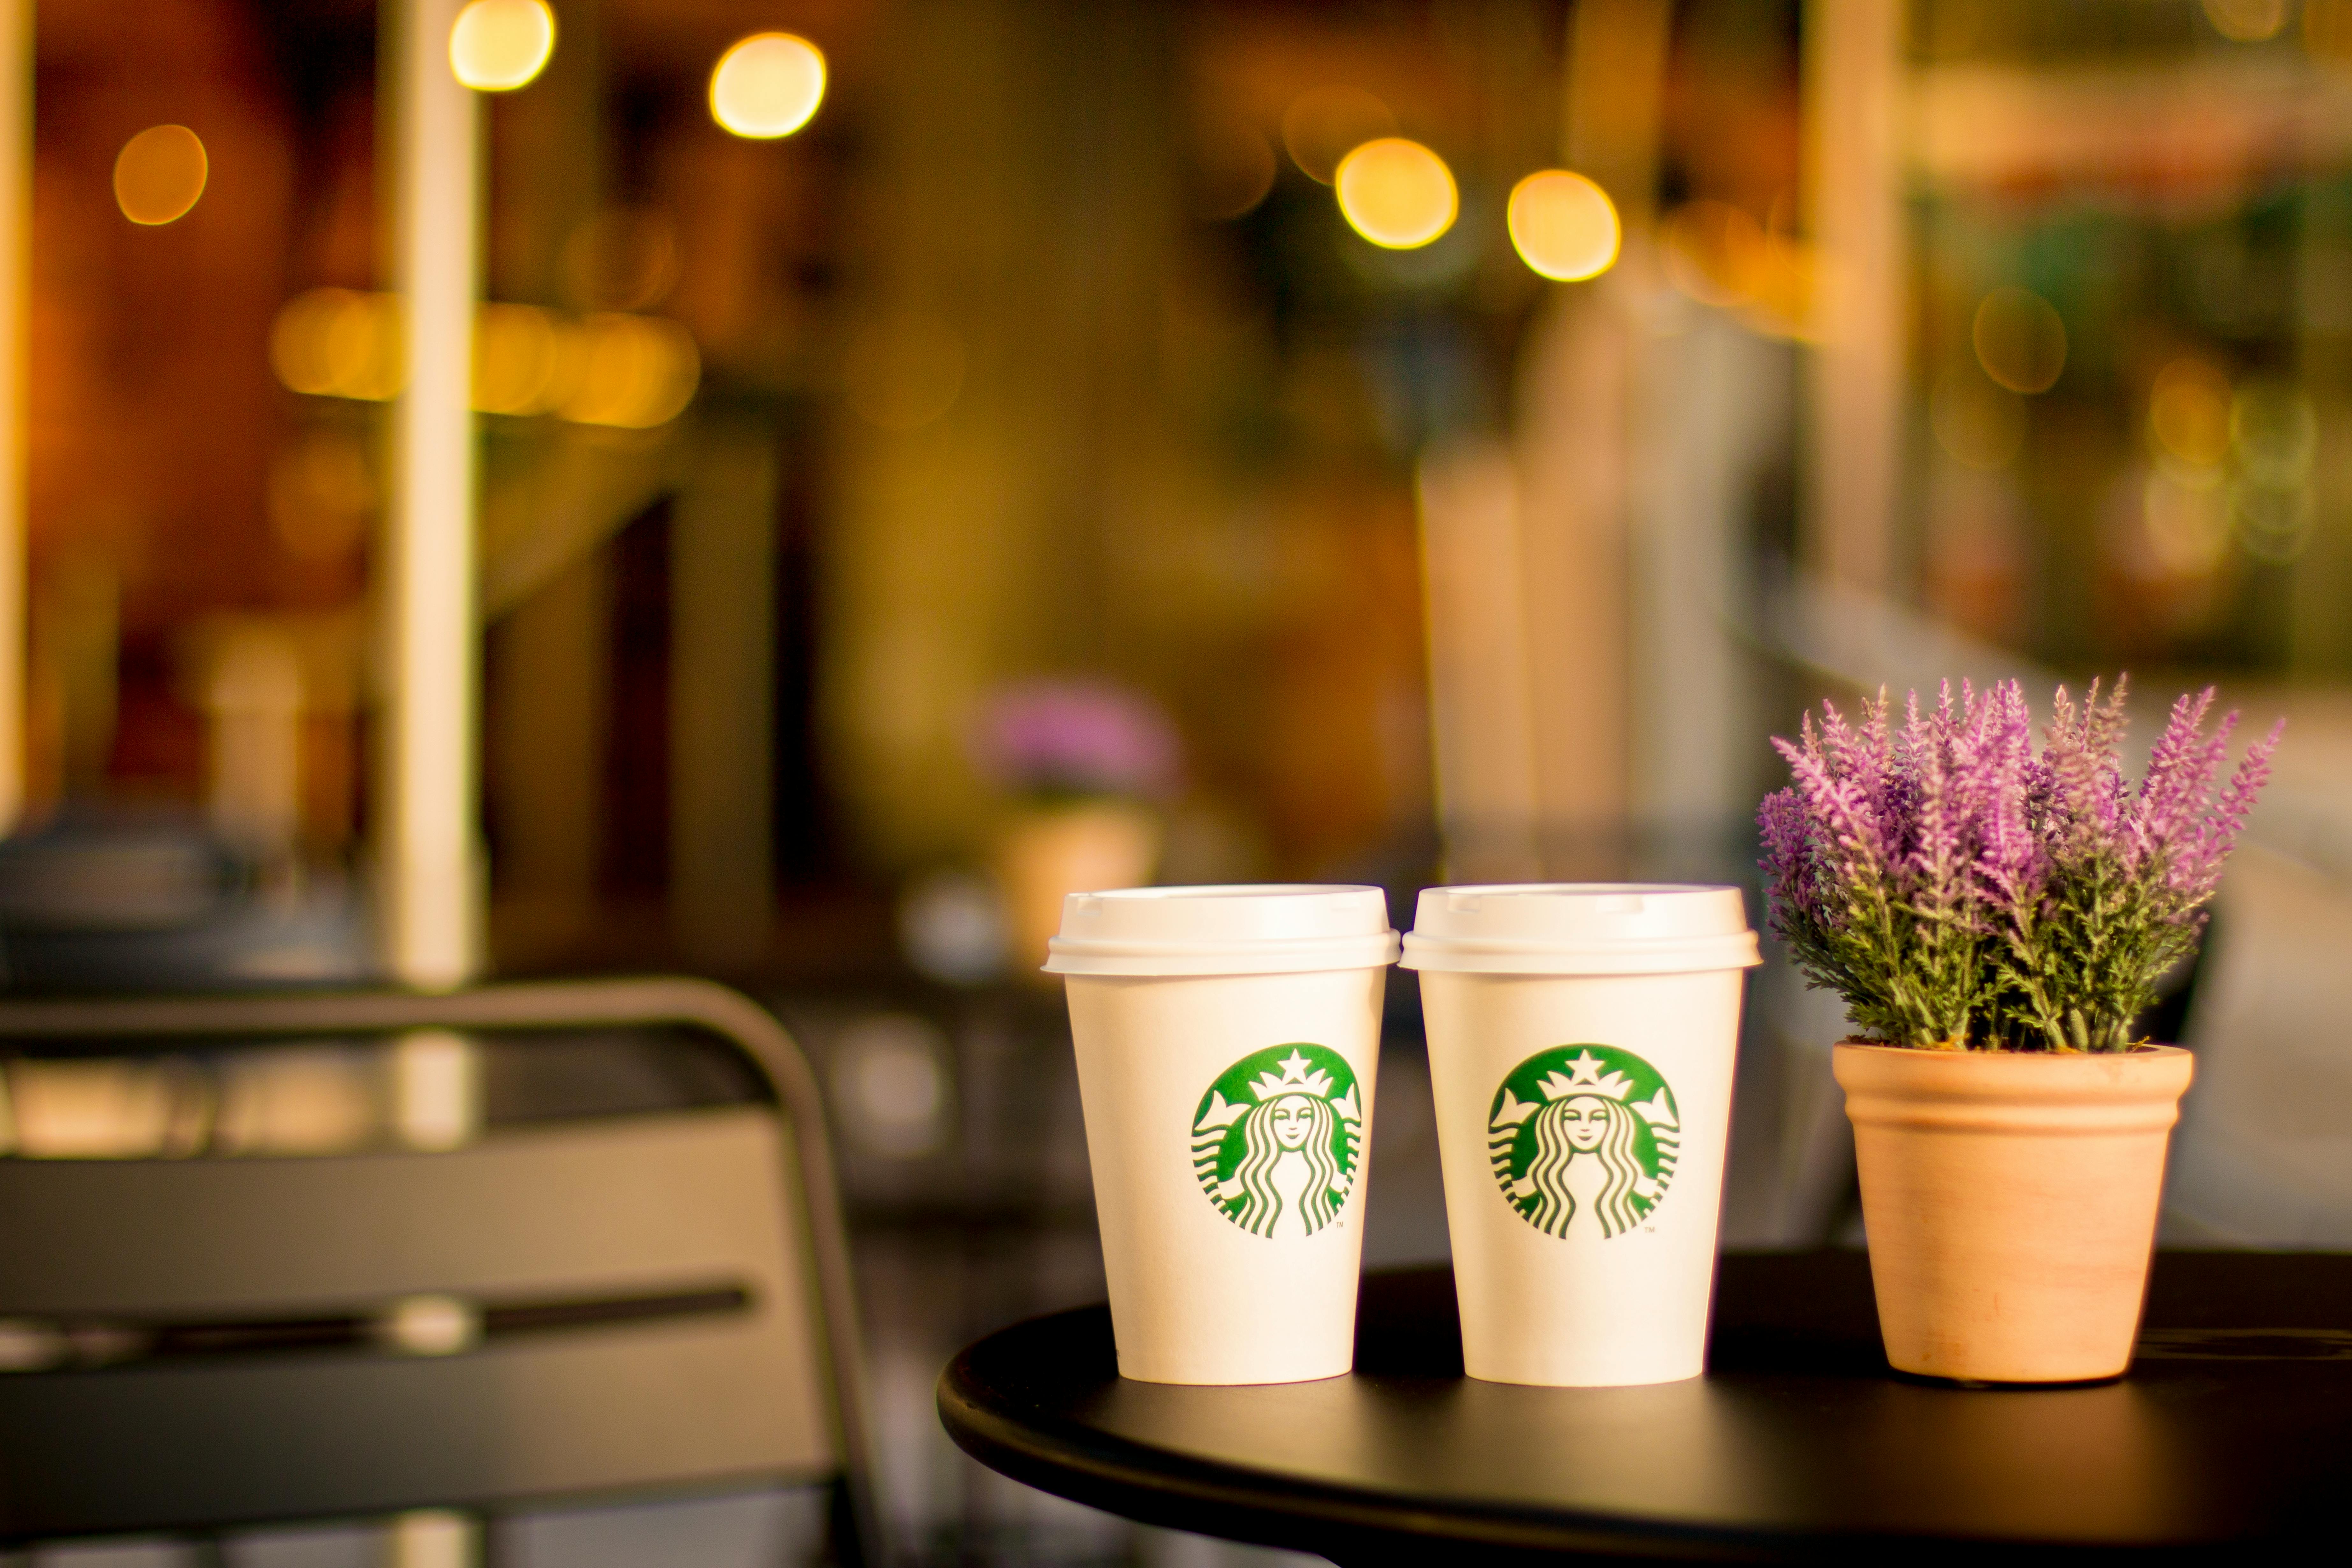 Starbucks Accused of Cutting Jobs & Hours in Extreme Manner